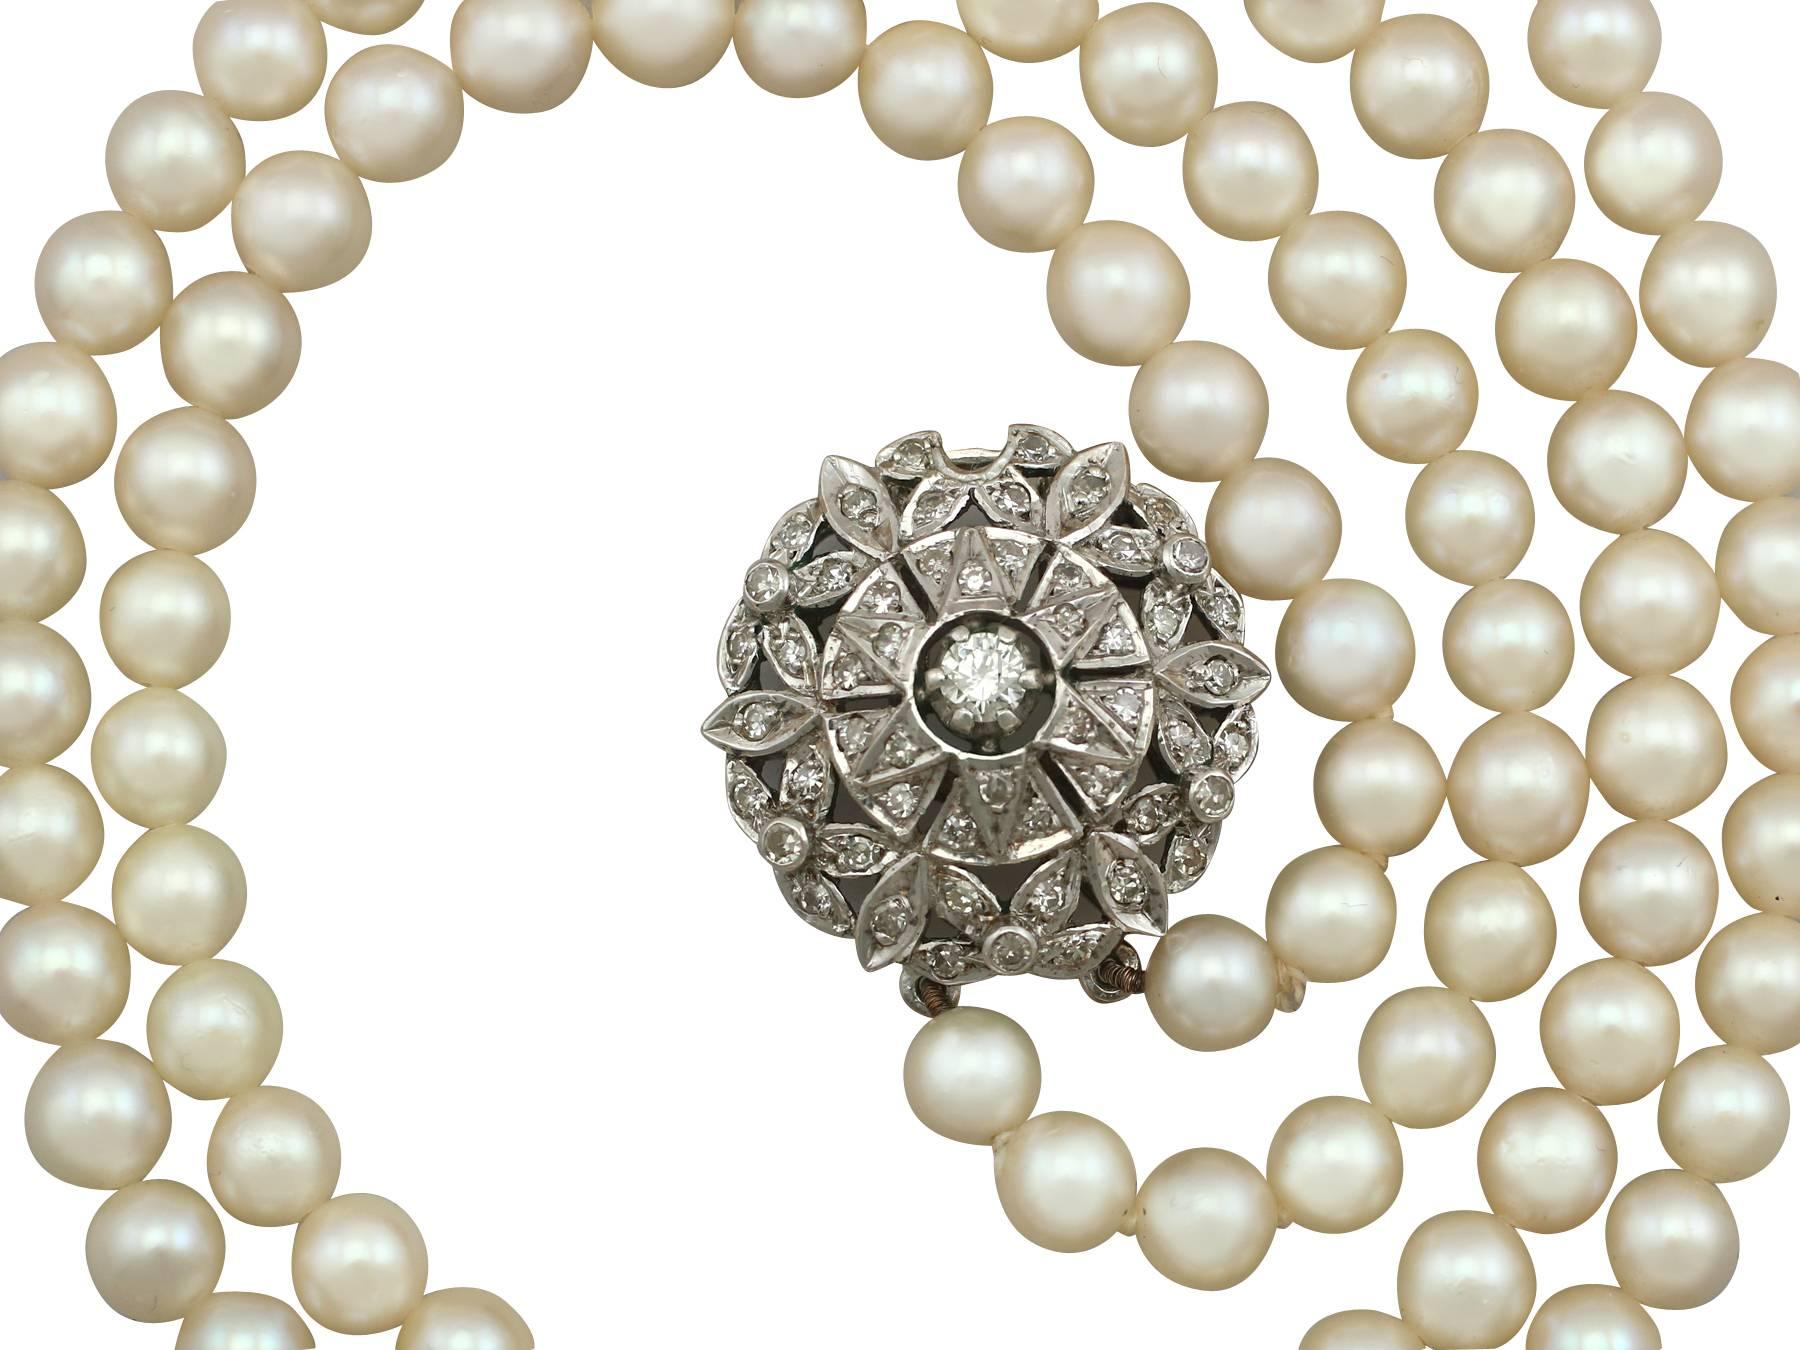 Romantic 1970s Double Strand Pearl Necklace with 1.05 Carat Diamond White Gold Clasp